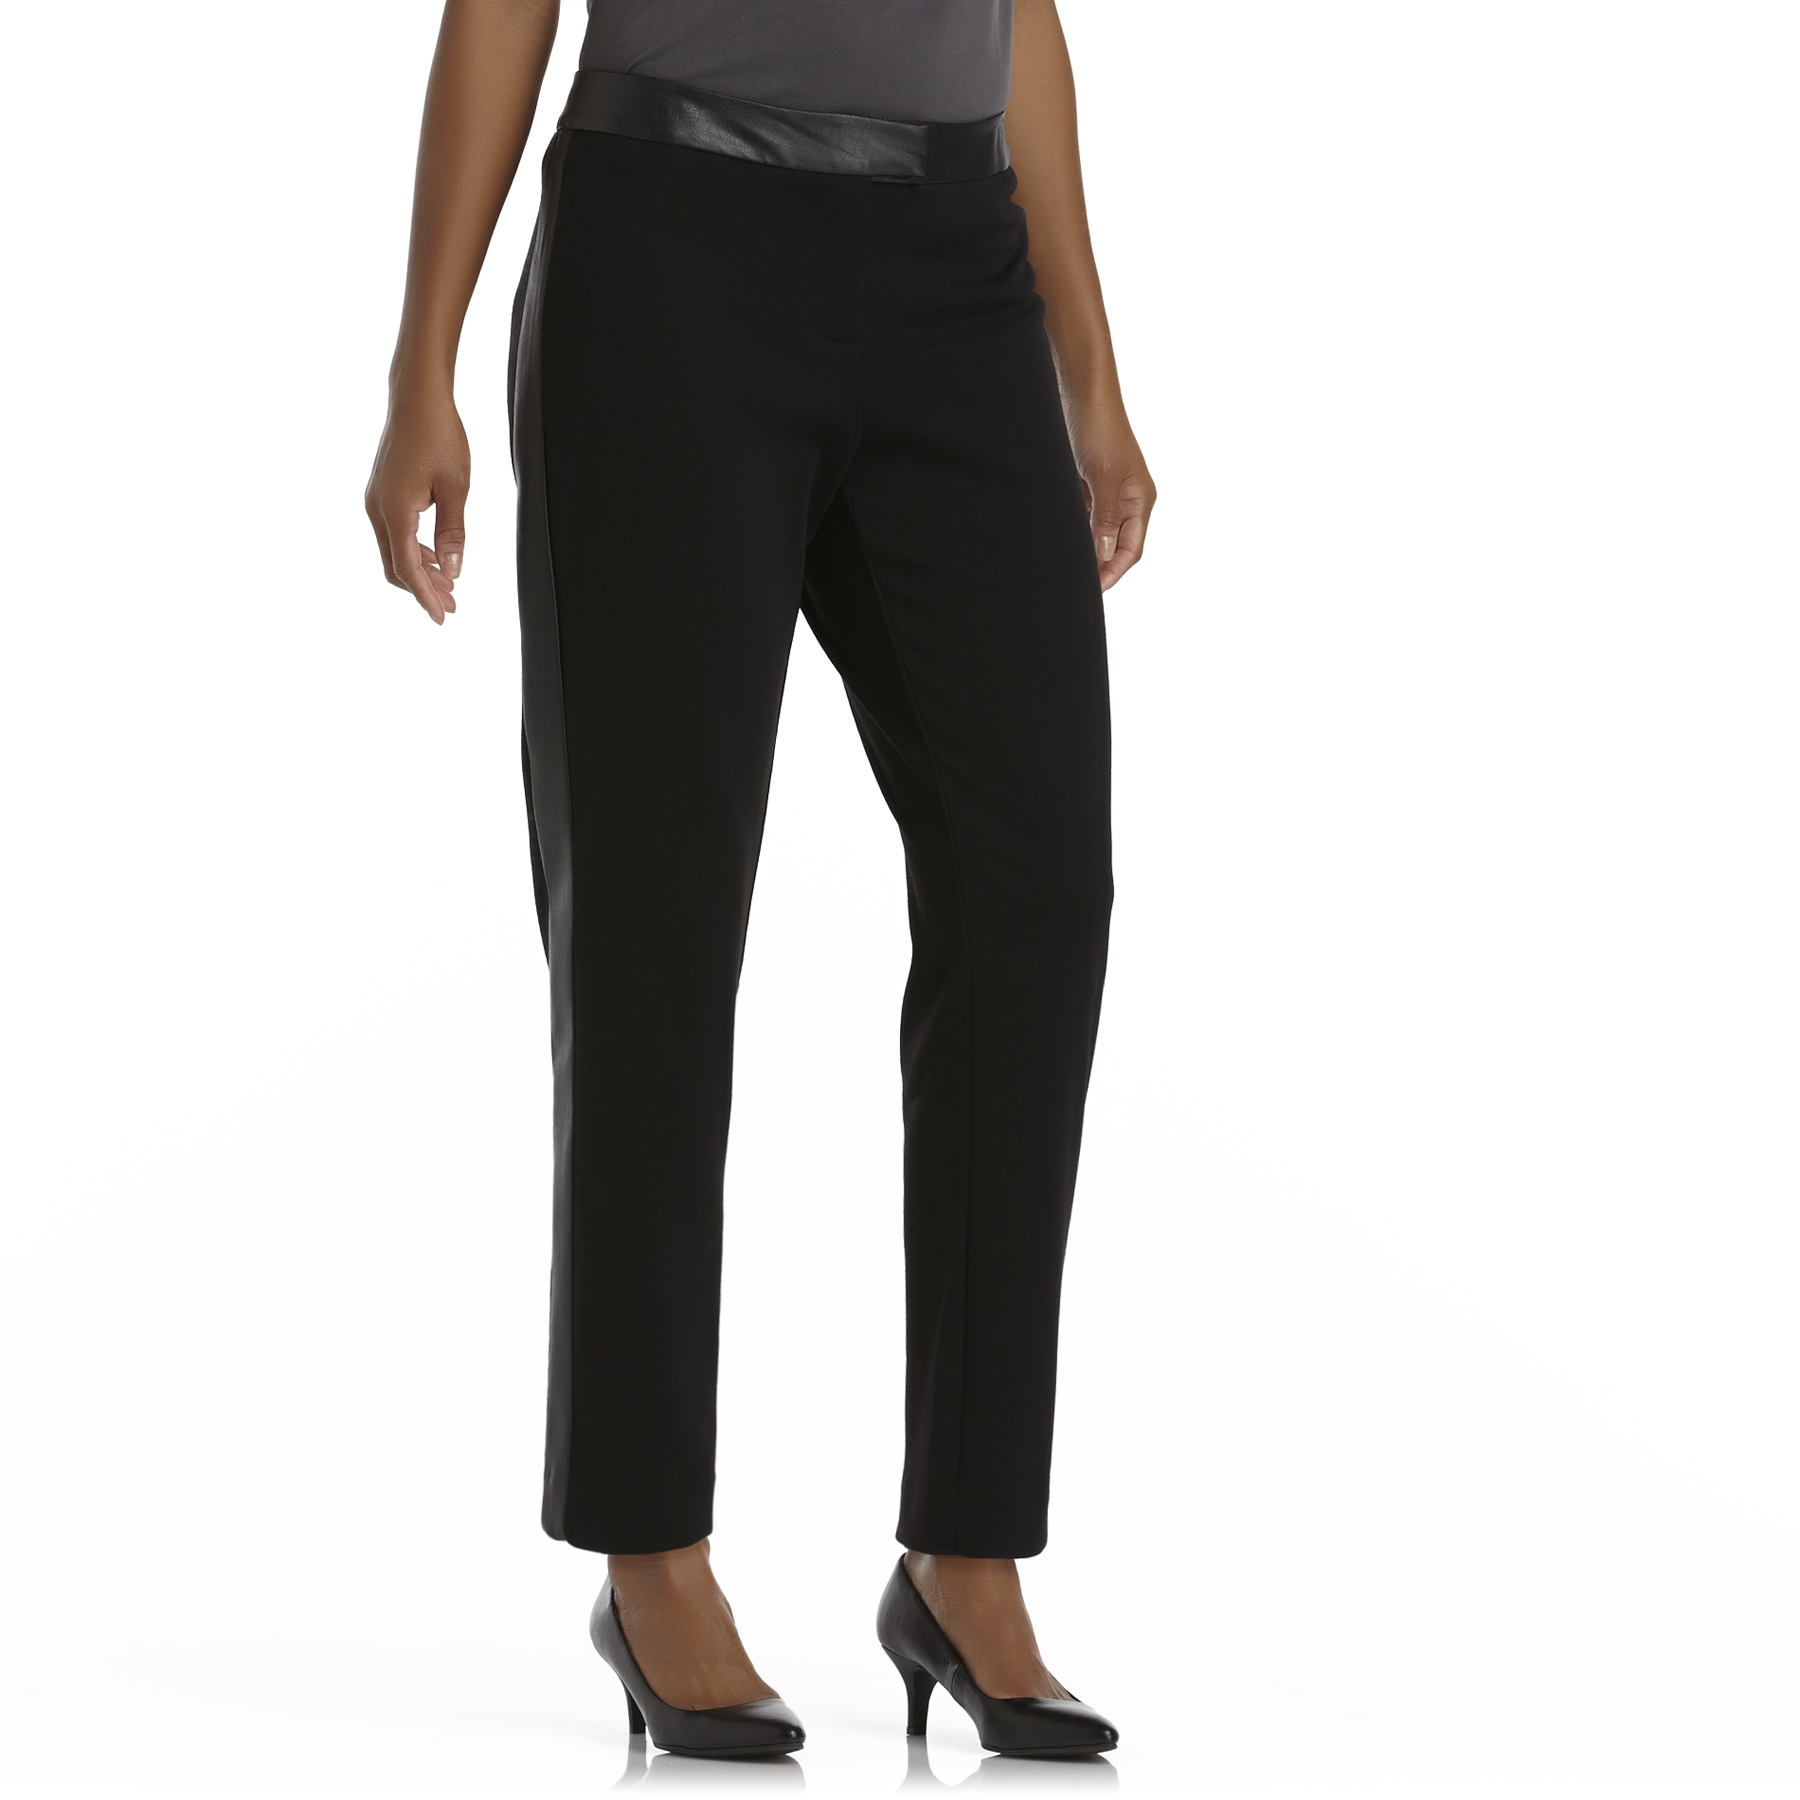 Metaphor Women's Petite's Fitted Ponte Pants - Faux Leather